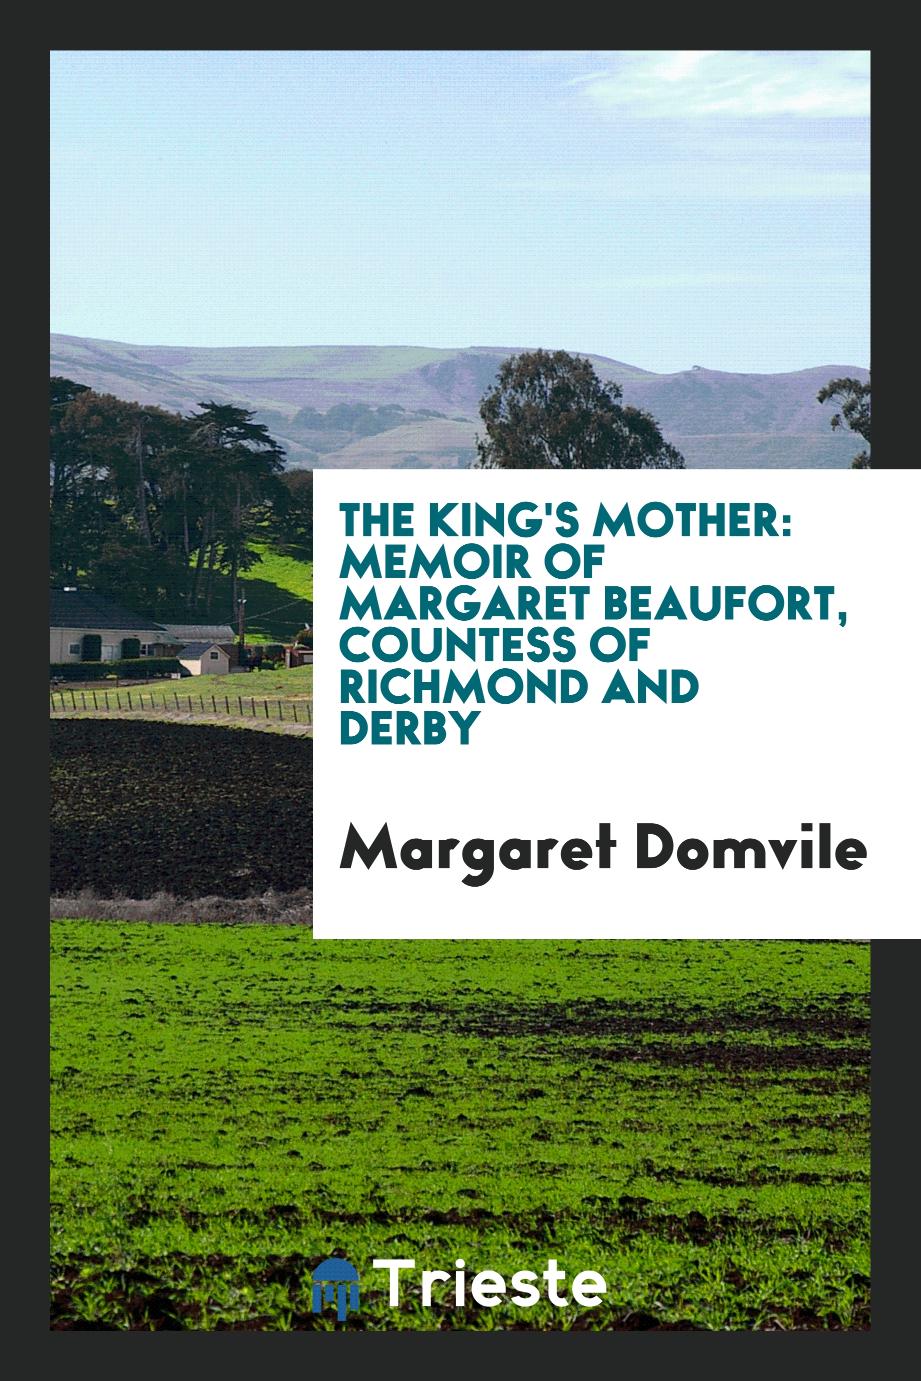 The king's mother: memoir of Margaret Beaufort, Countess of Richmond and Derby